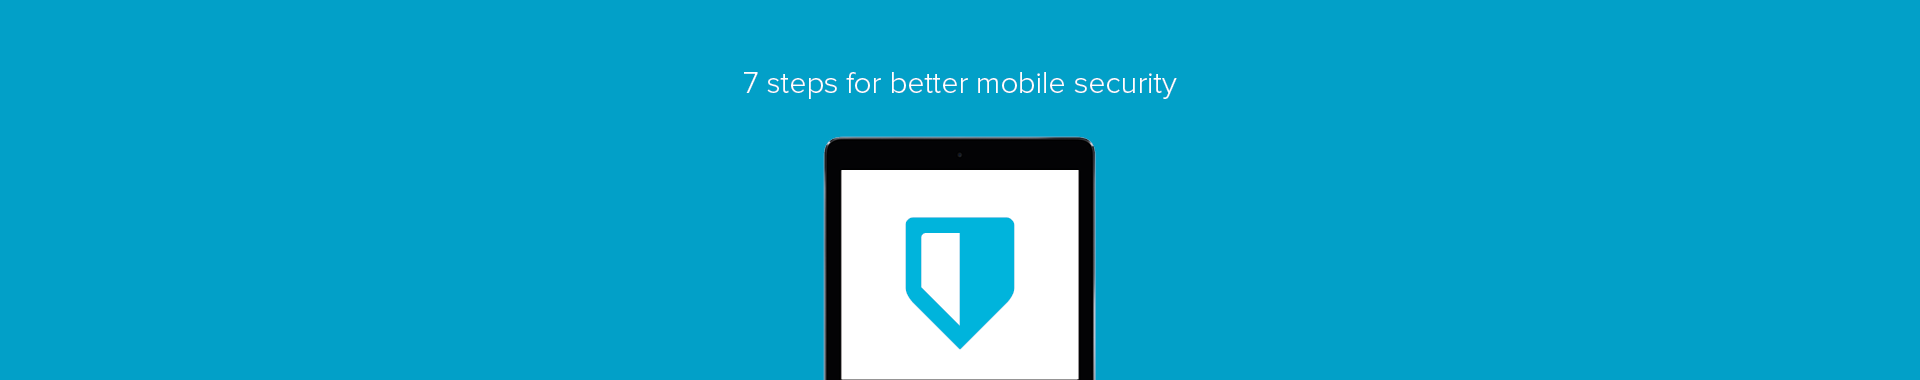 7 tips to improve your mobile security